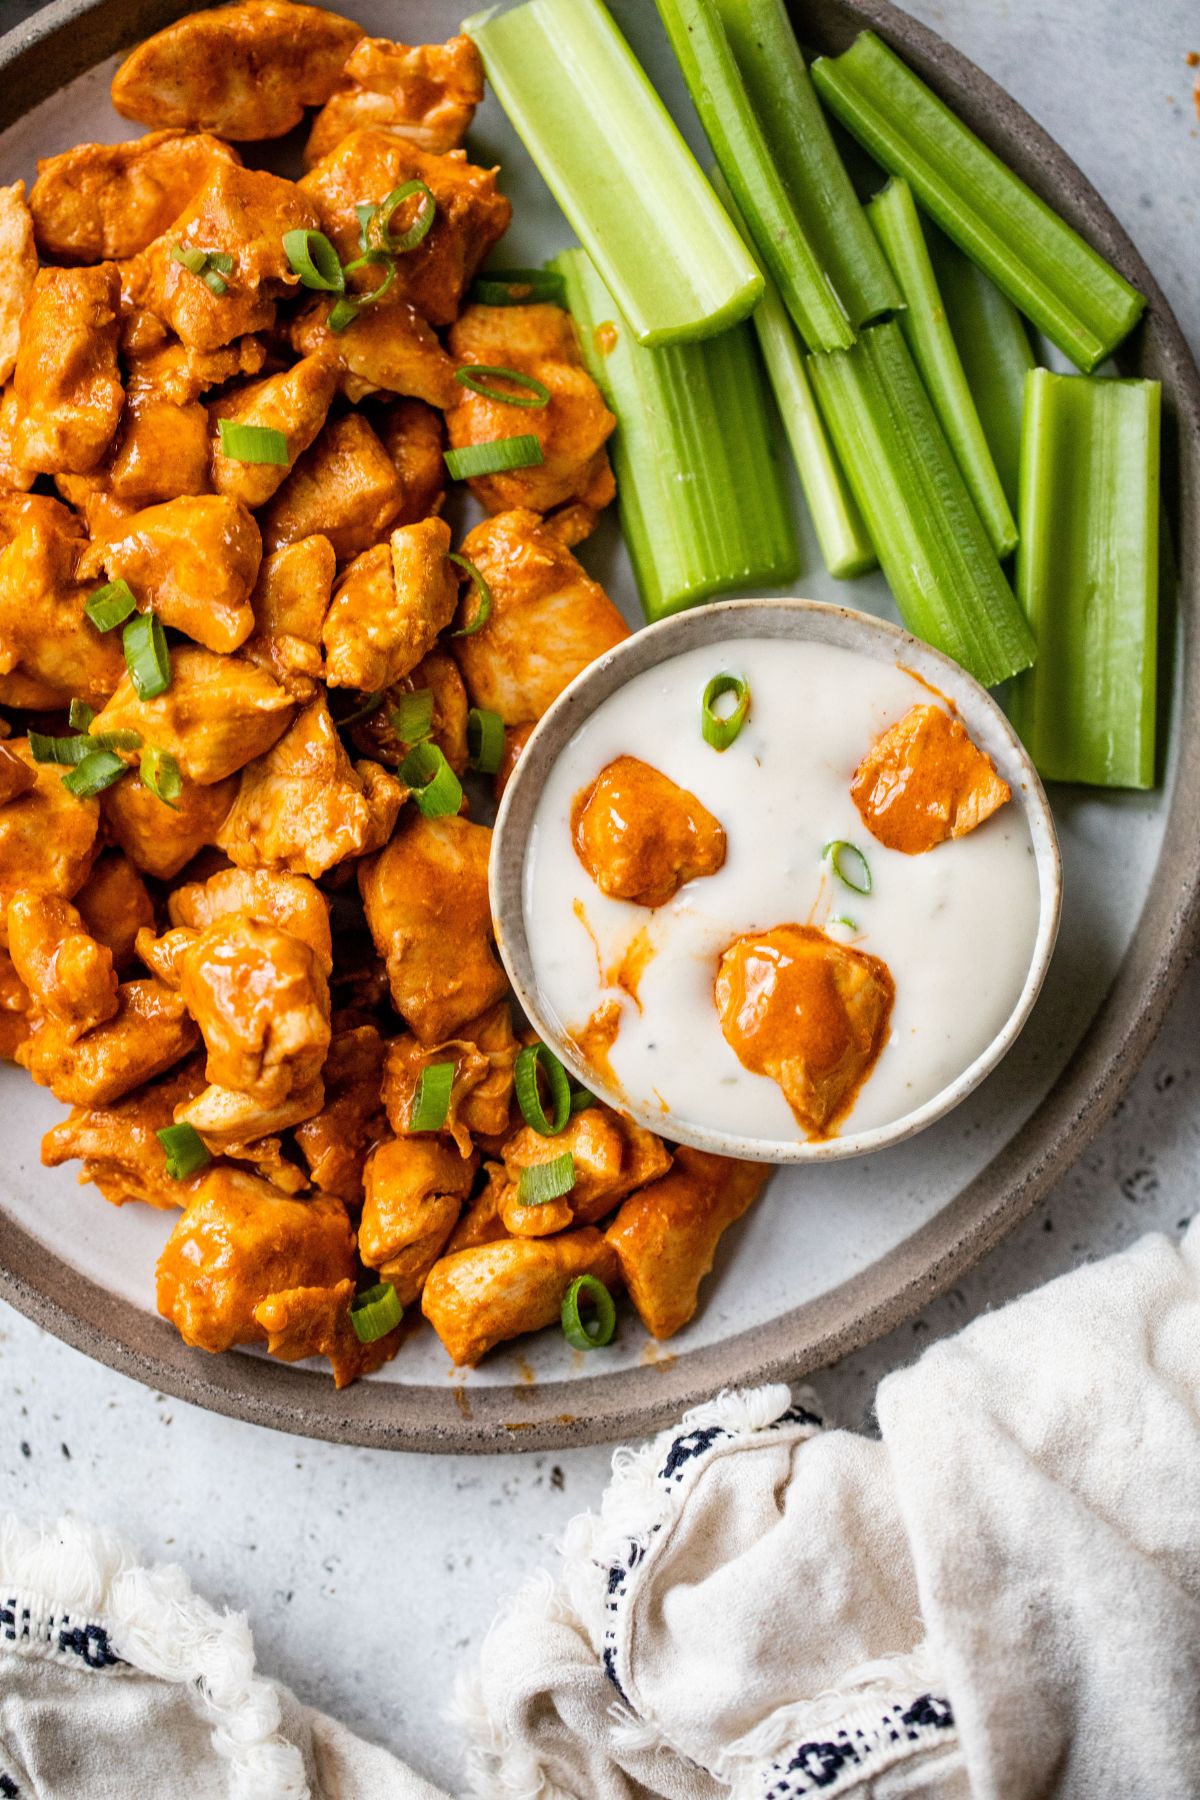 Buffalo chicken bites dipped in a creamy white dressing.